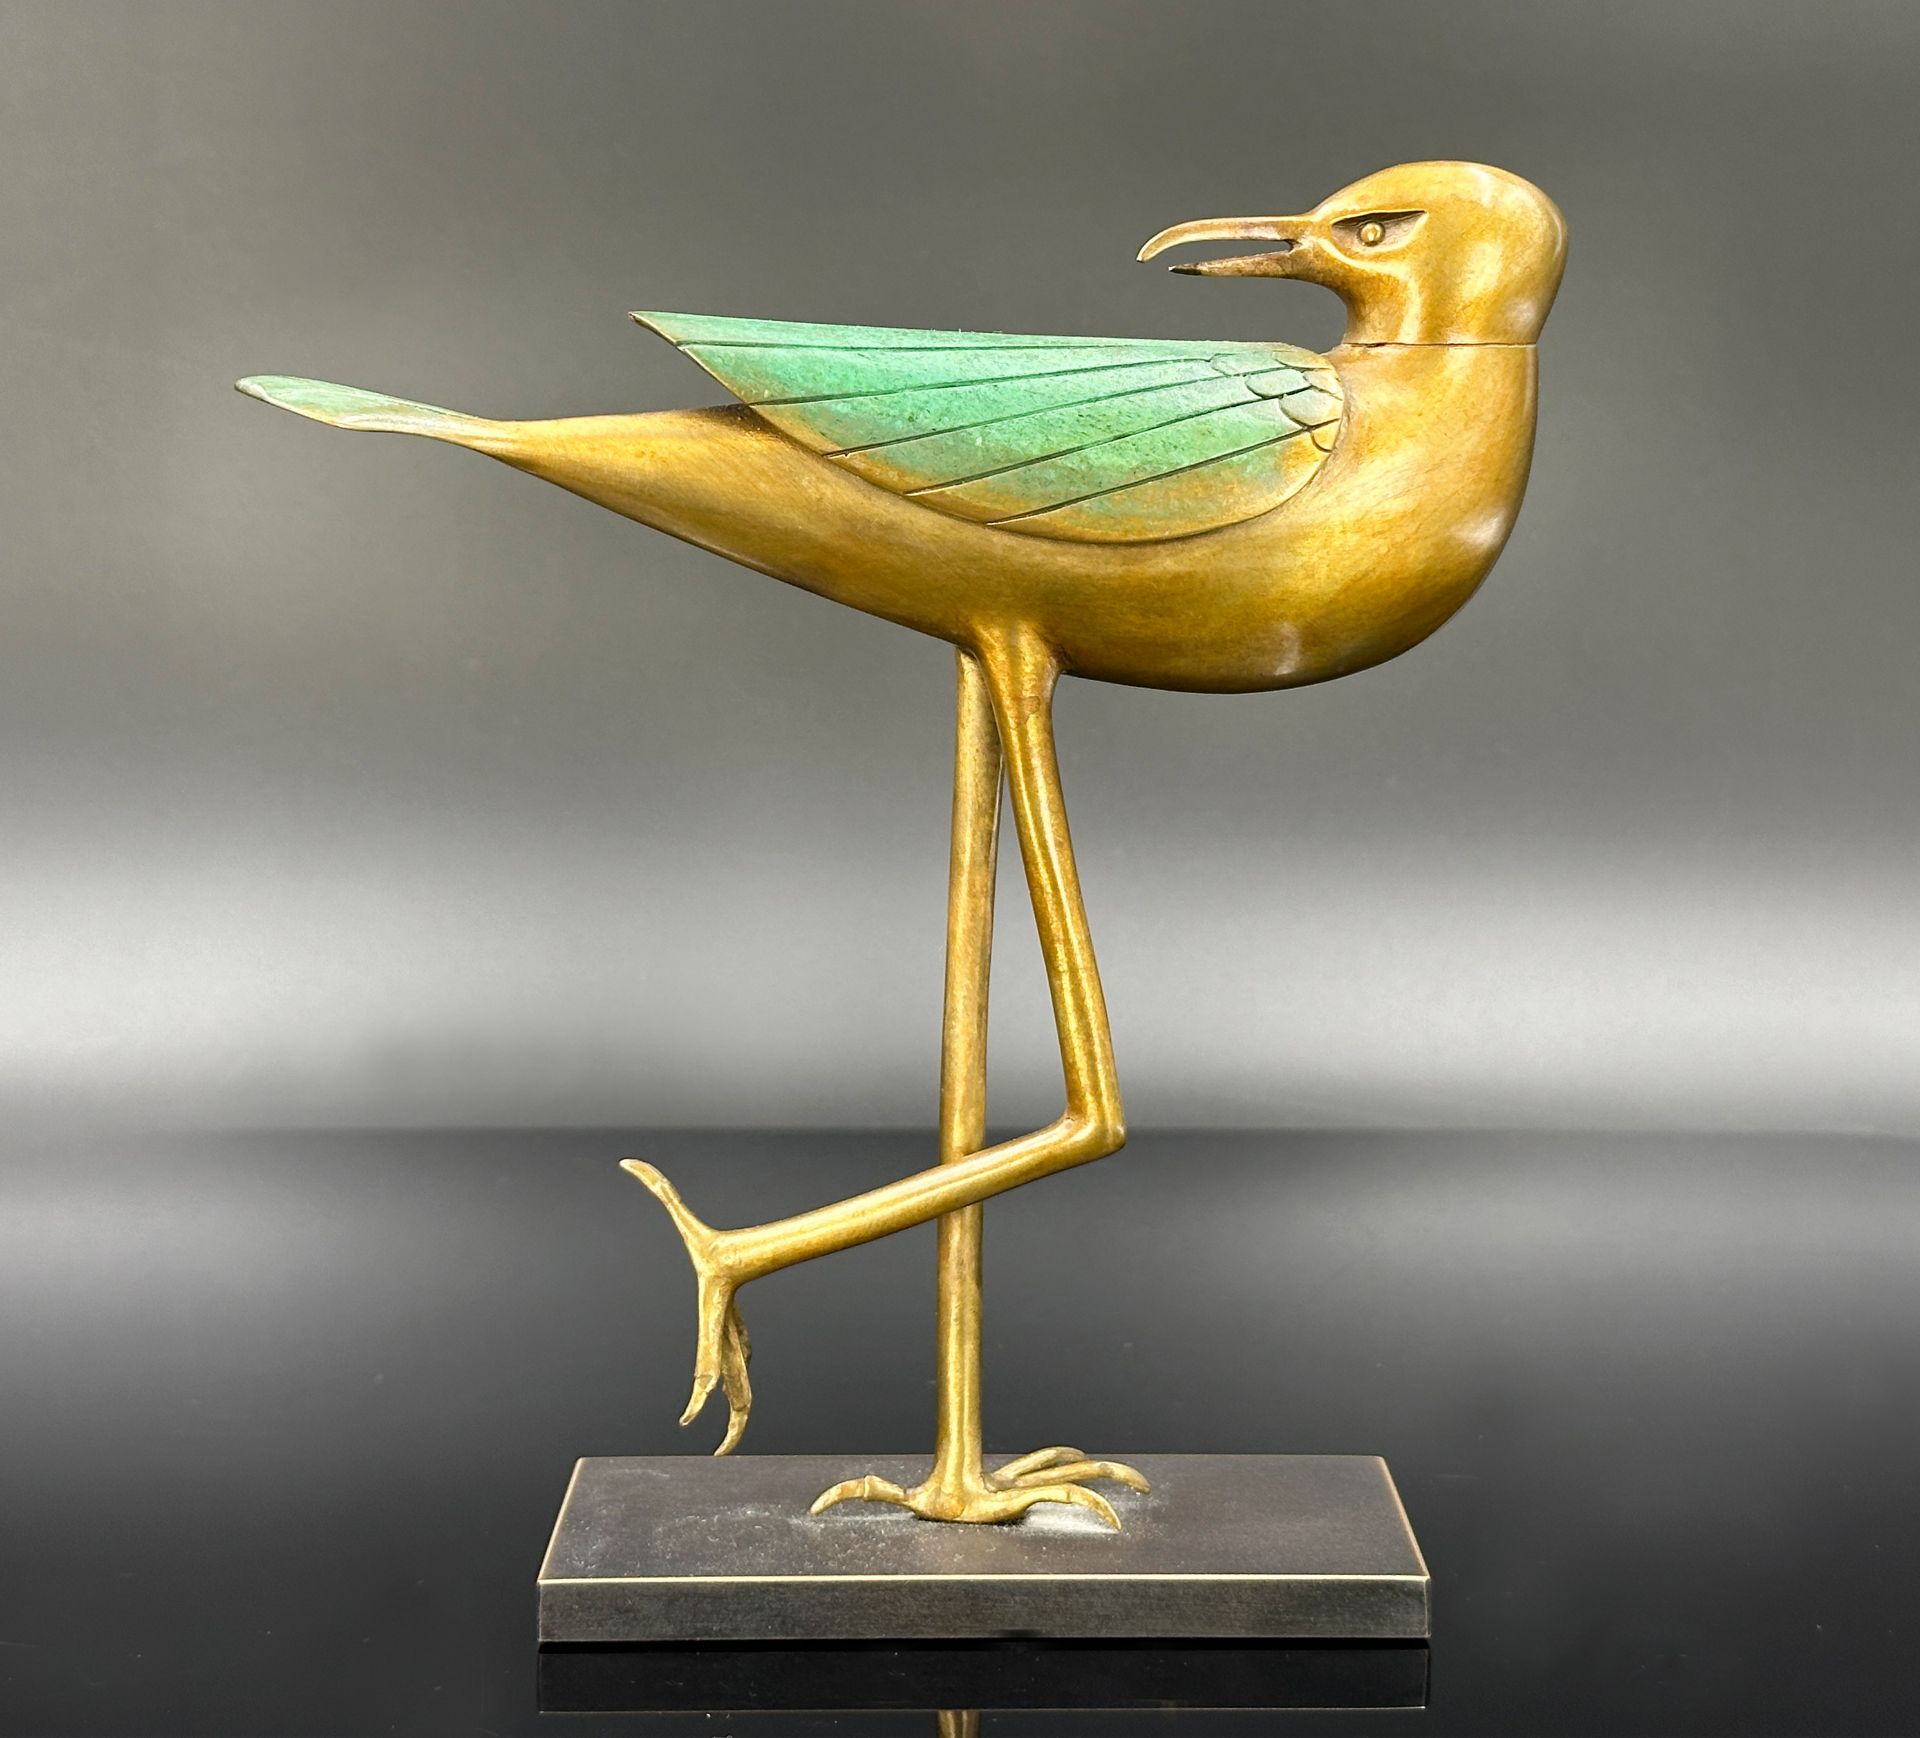 Paul WUNDERLICH (1927 - 2010). Bronze. "Seagull". 2008. - Image 3 of 8